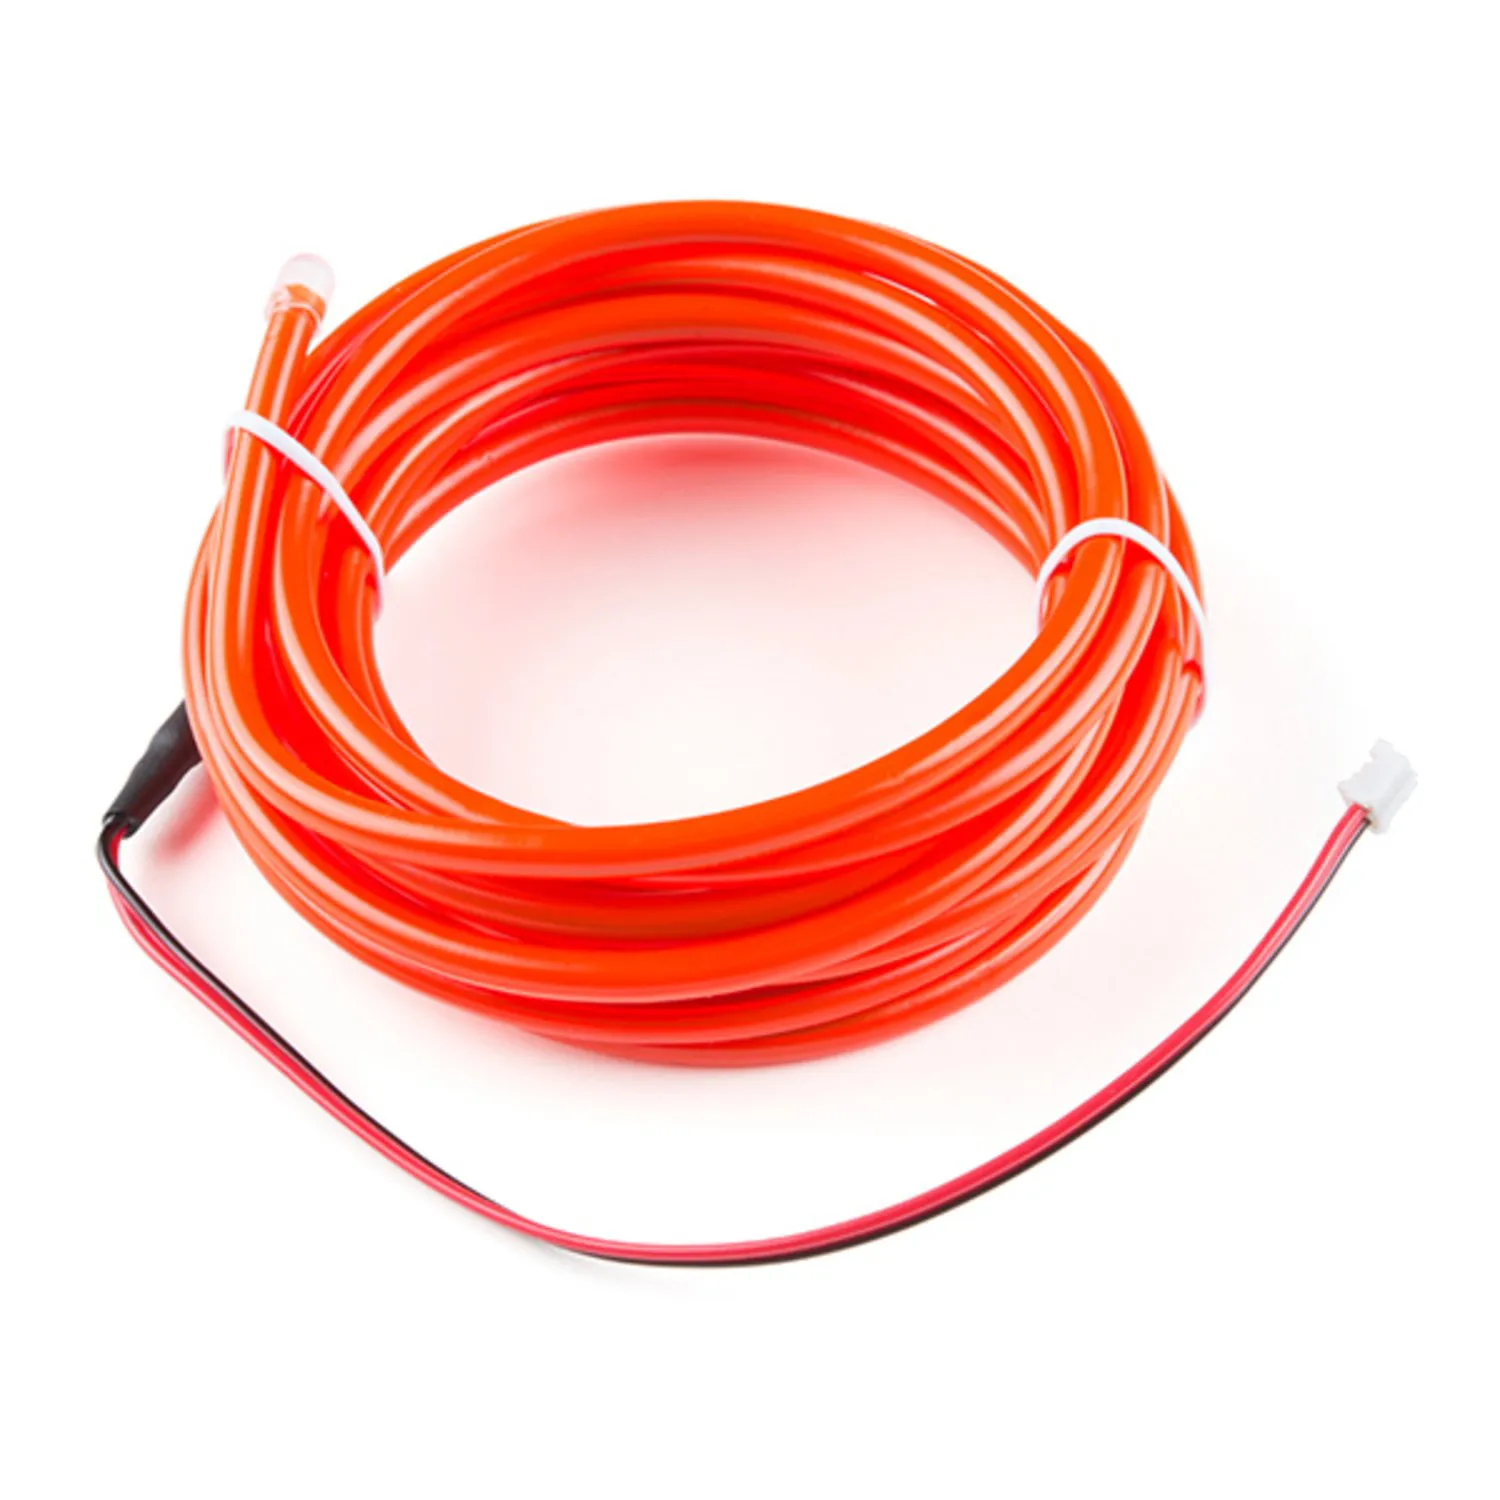 Photo of Bendable EL Wire - Red 3m